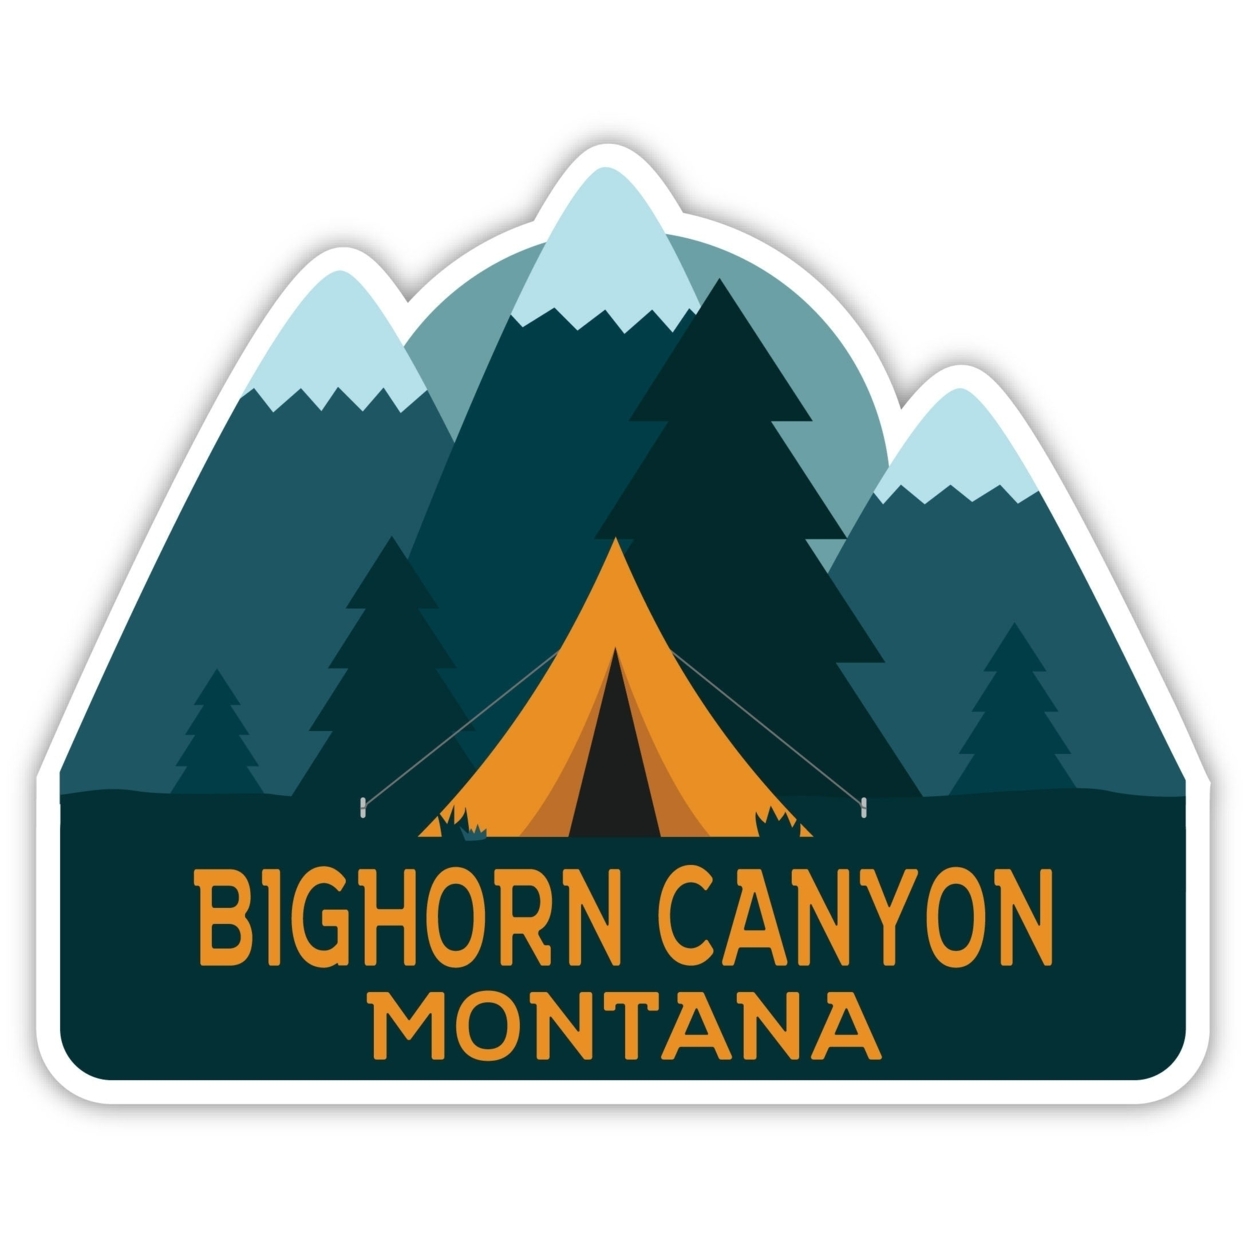 Bighorn Canyon Montana Souvenir Decorative Stickers (Choose Theme And Size) - 4-Pack, 8-Inch, Tent